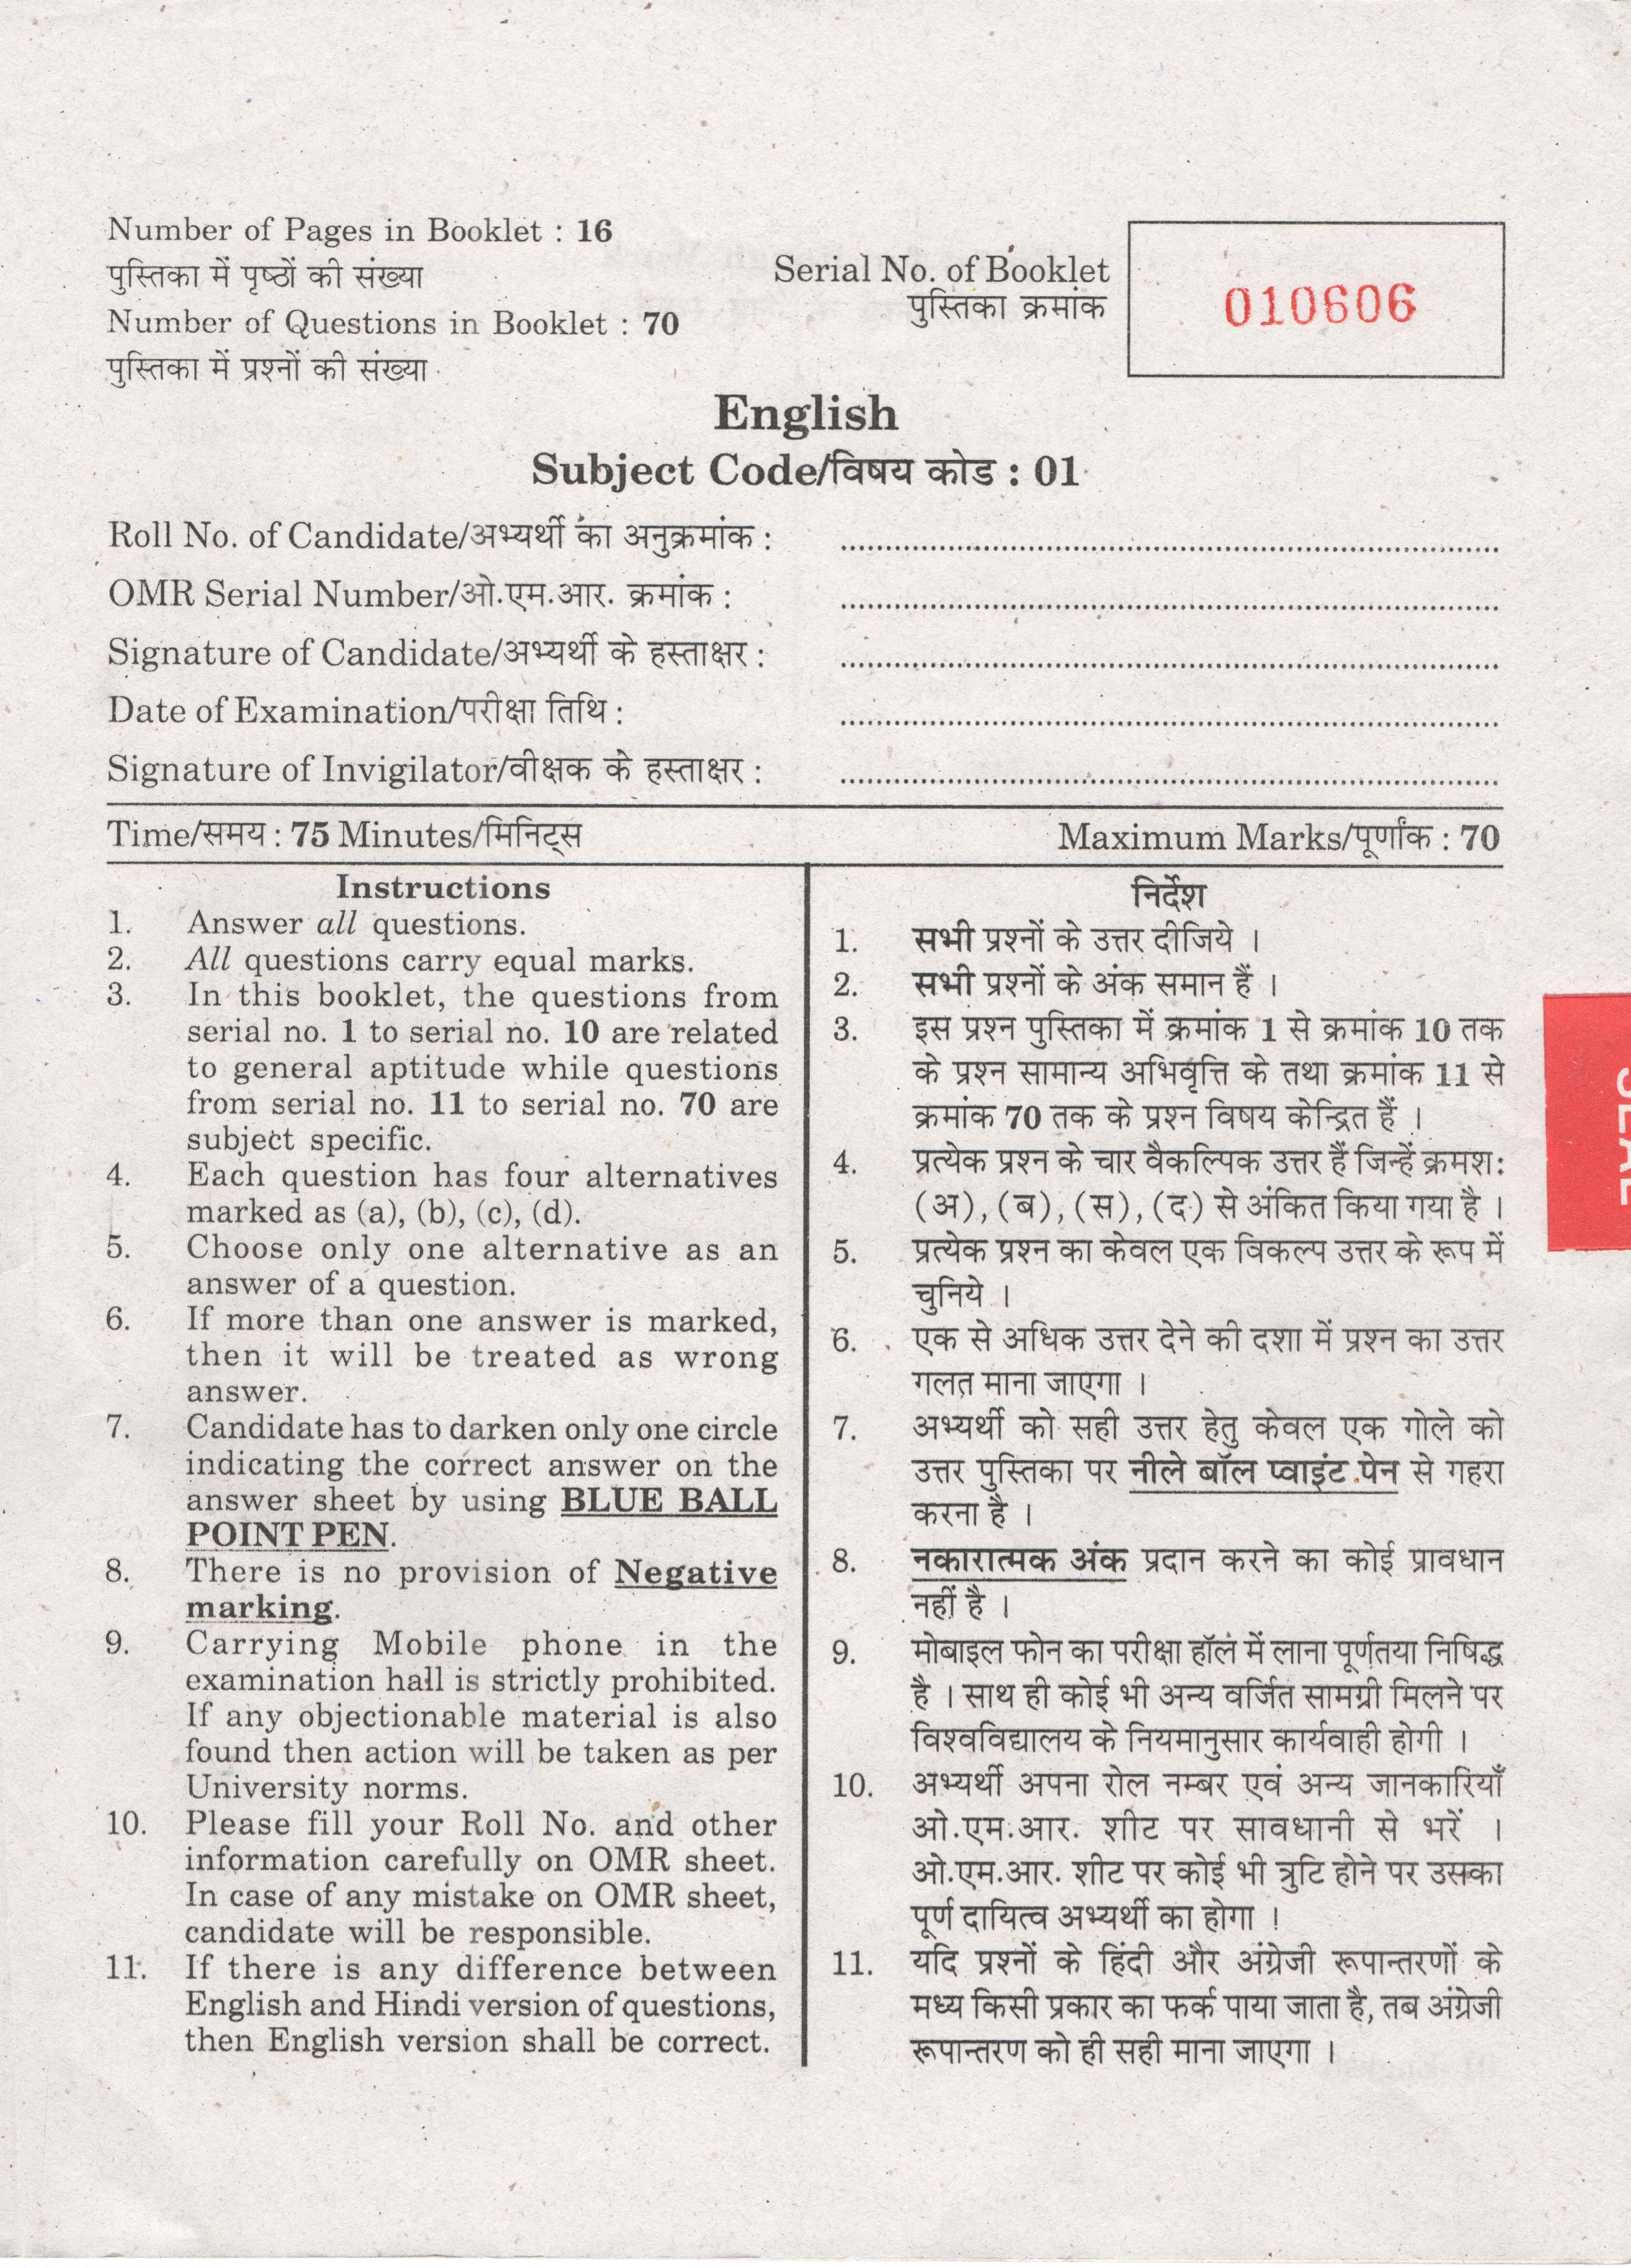 URATPG English 2013 Question Paper - Page 1